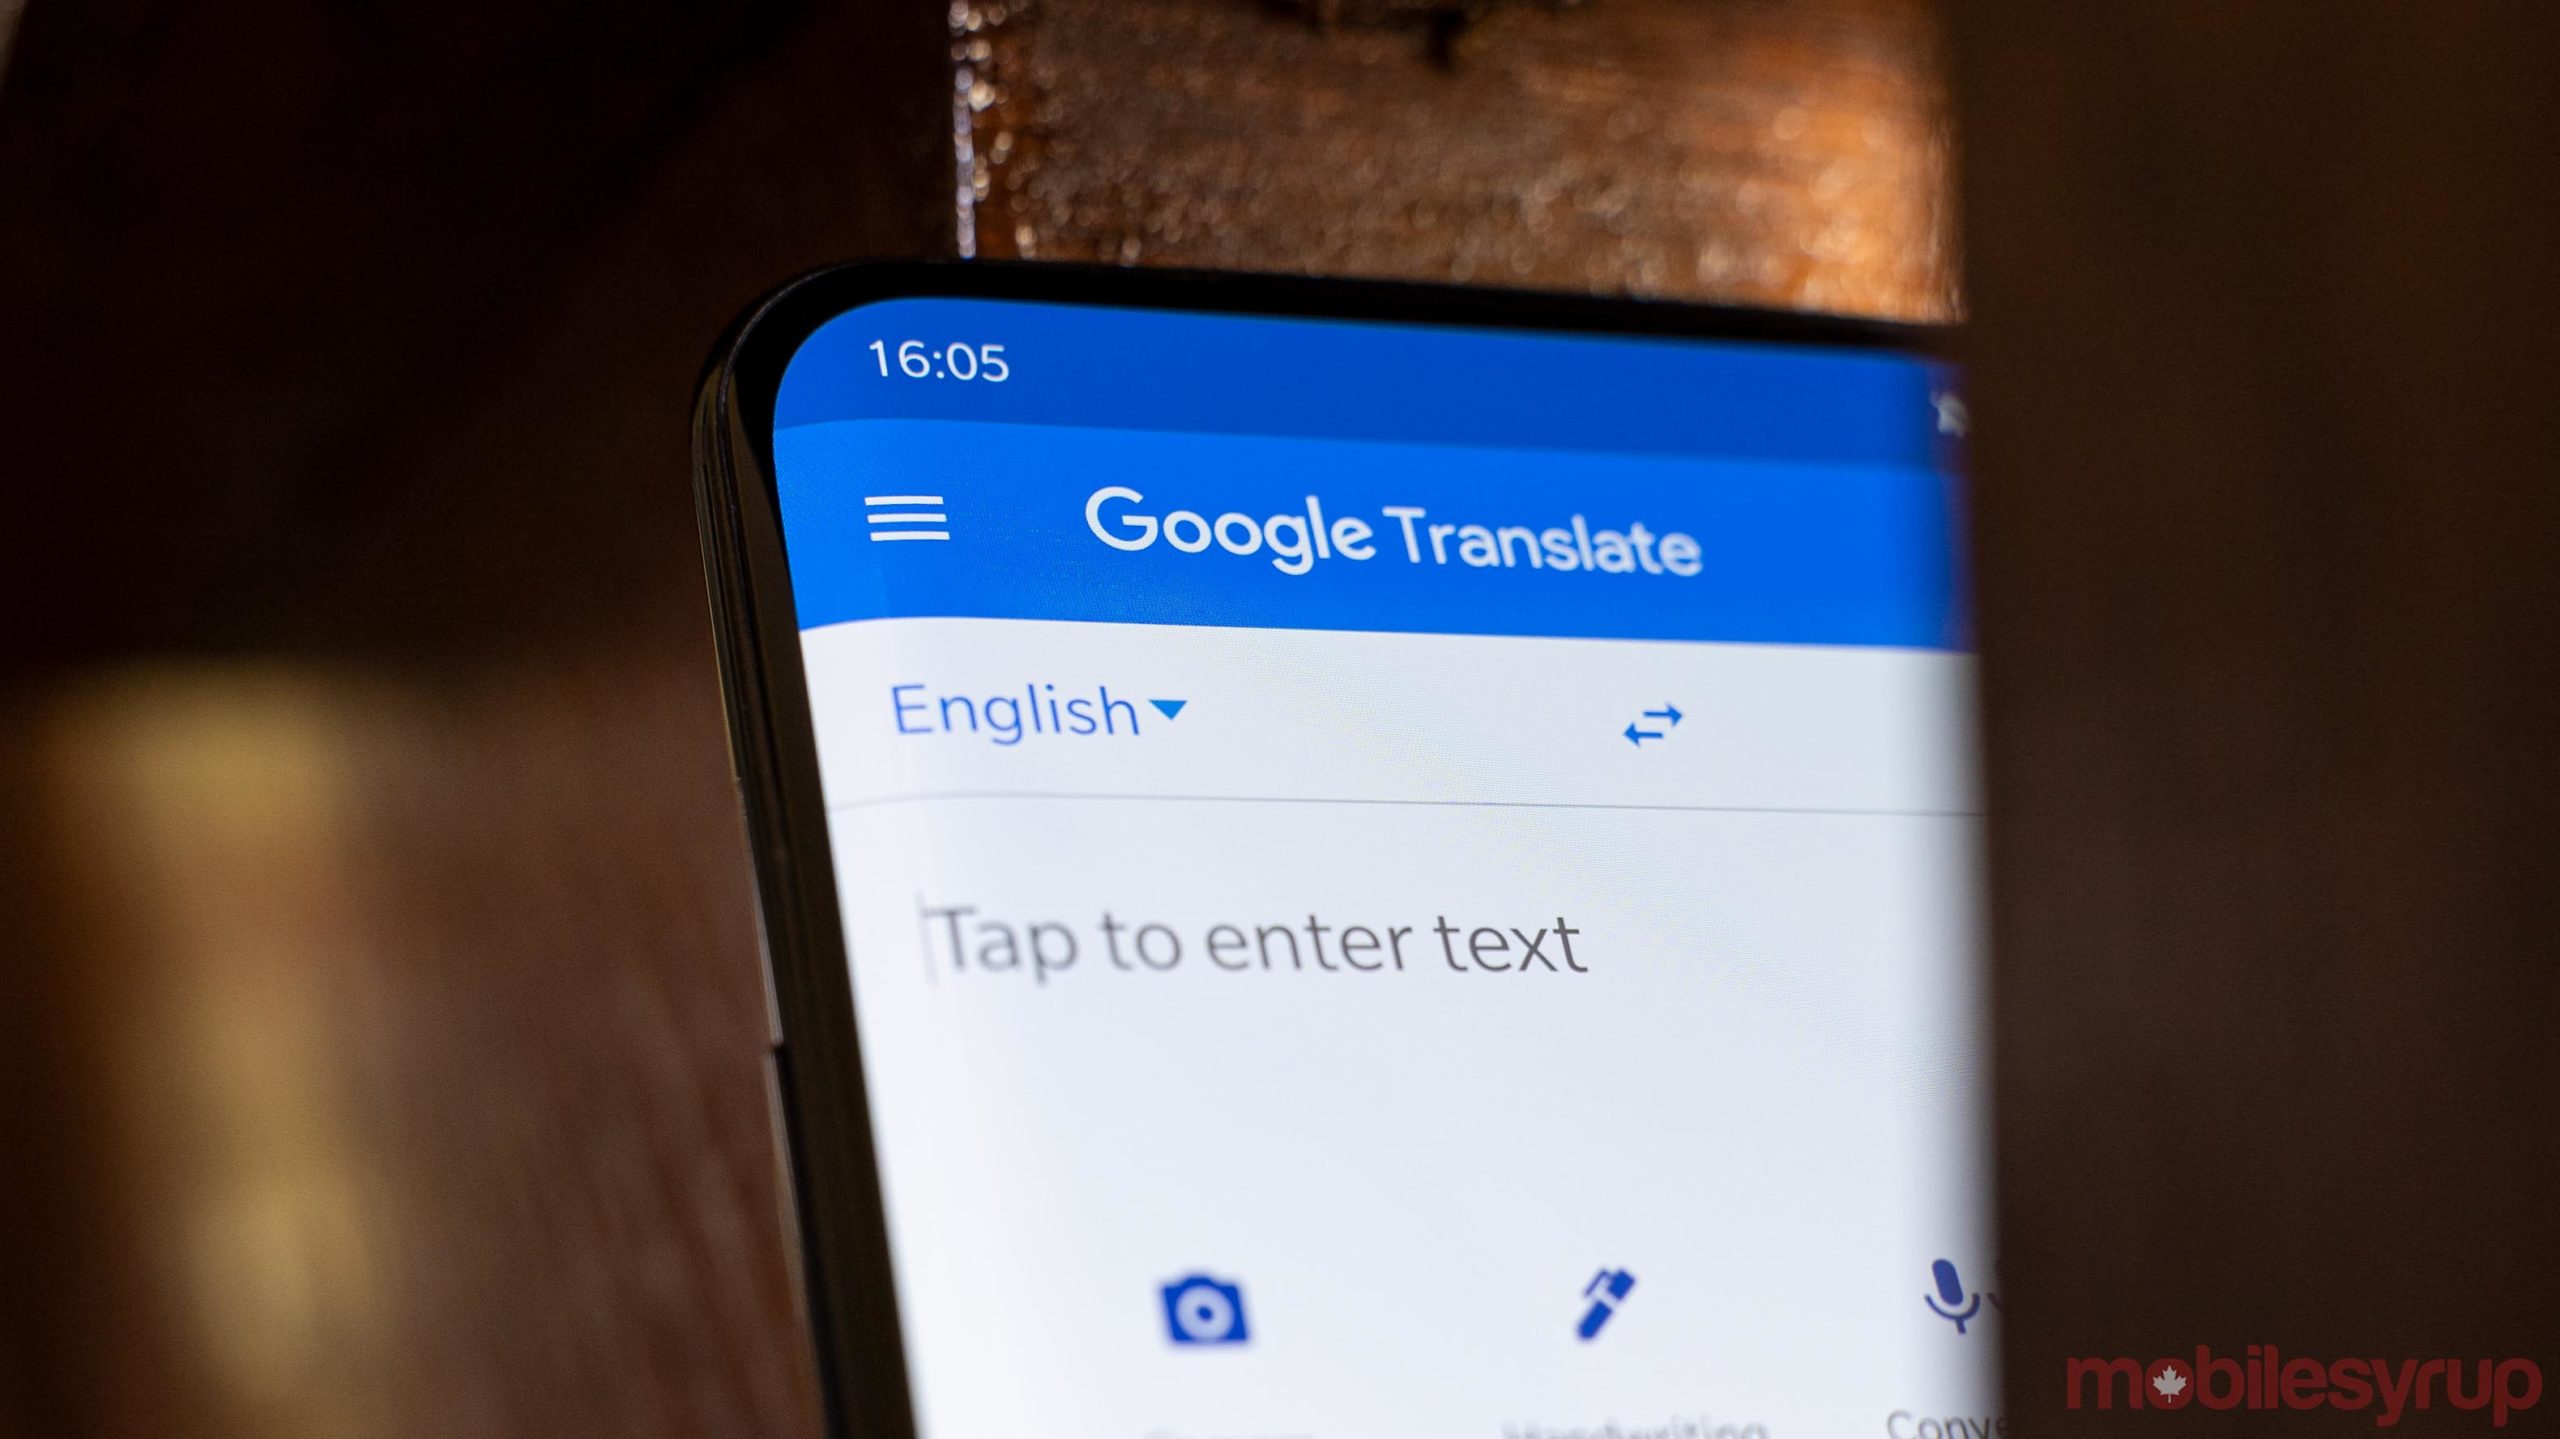 Google Translate on Android